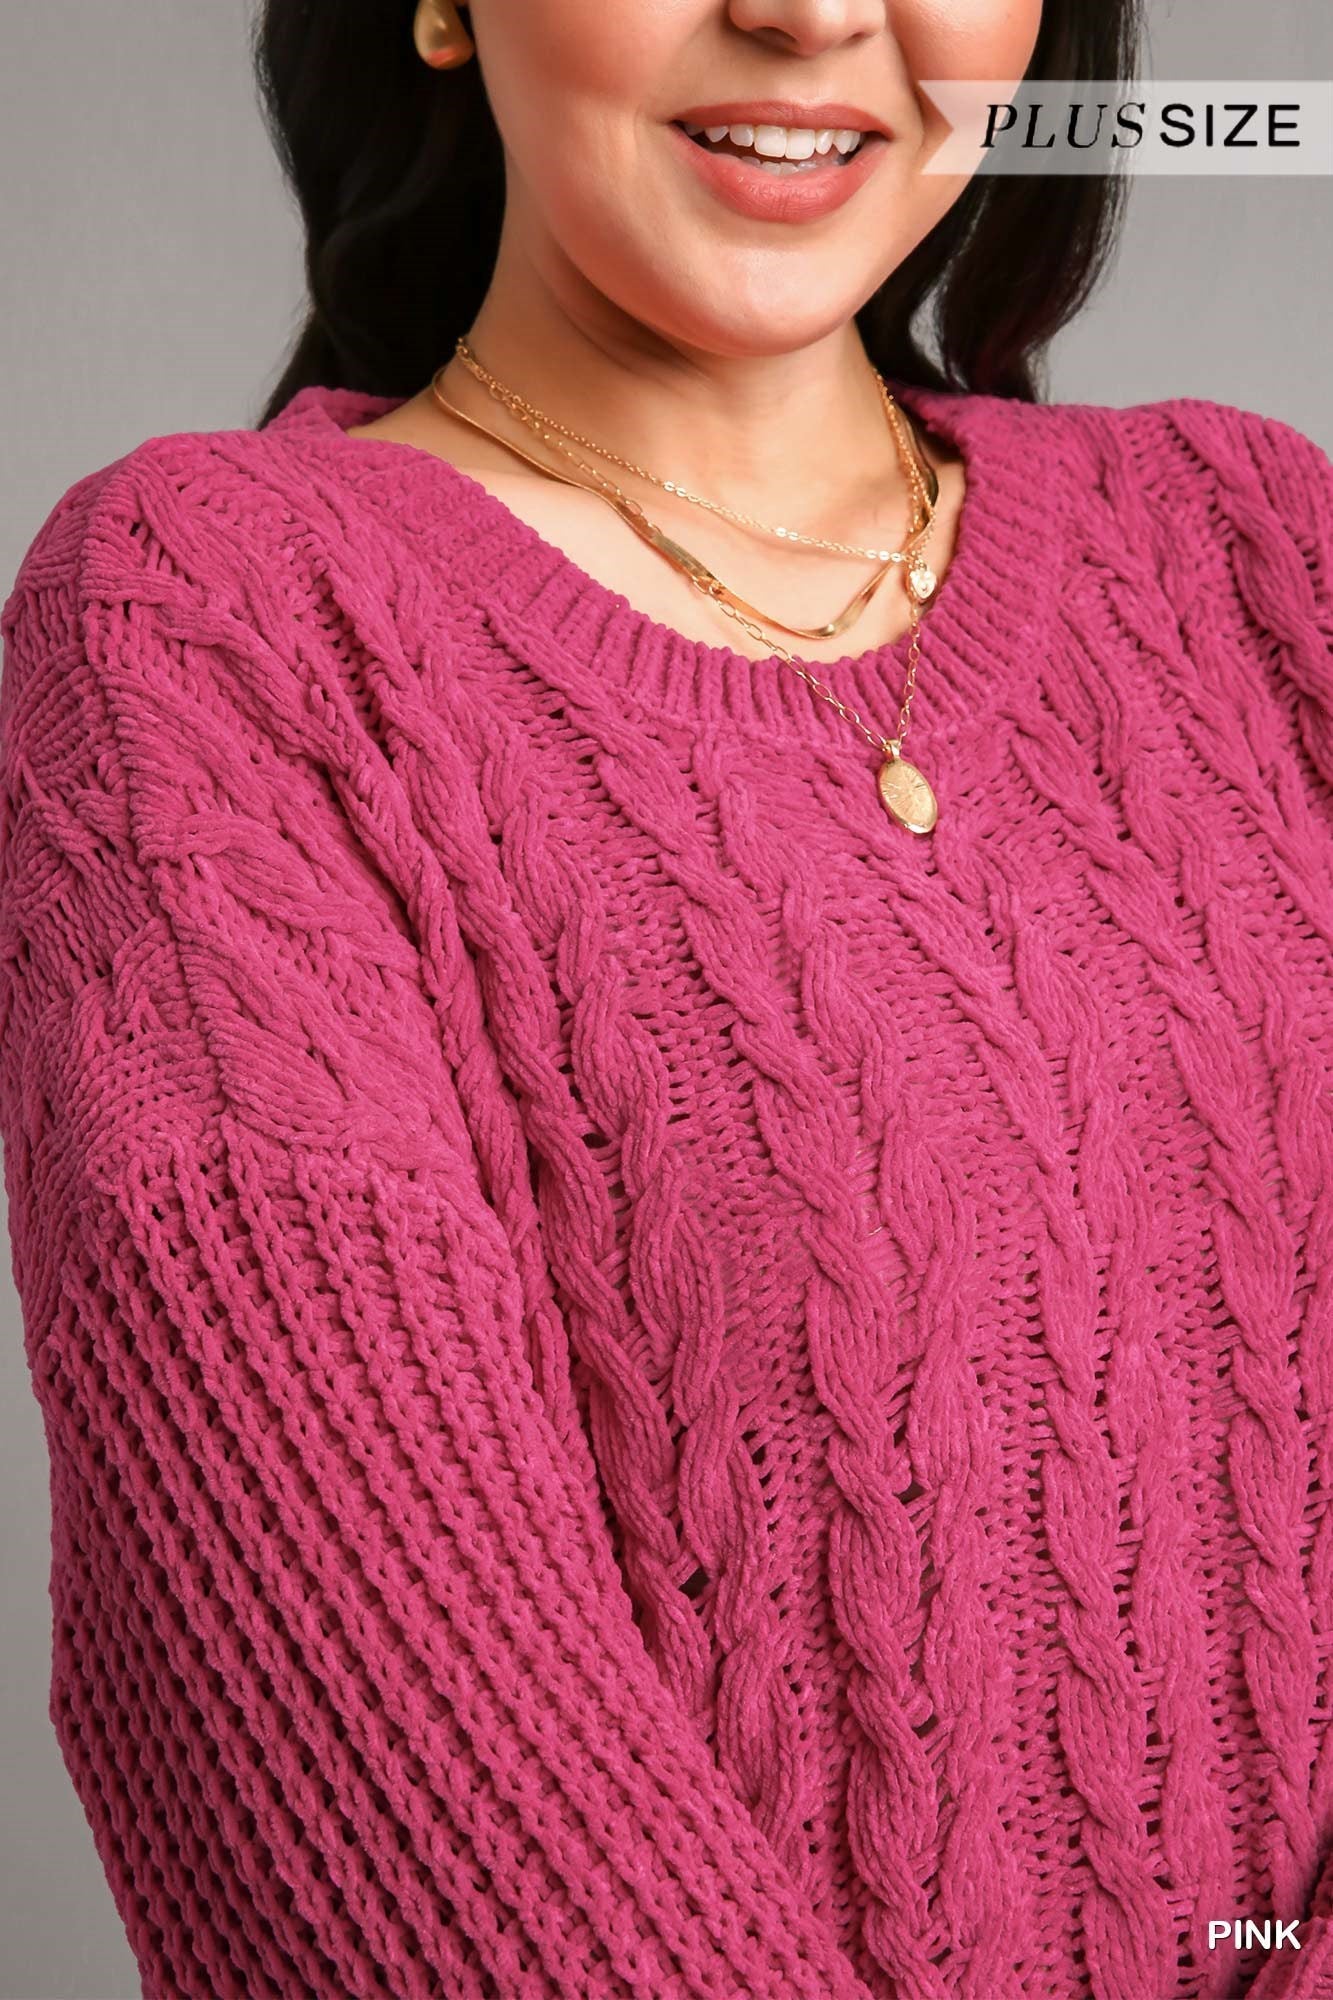 Umgee Plus Cuffed Long Sleeve Chenille Cable Knit Pullover Sweater Top